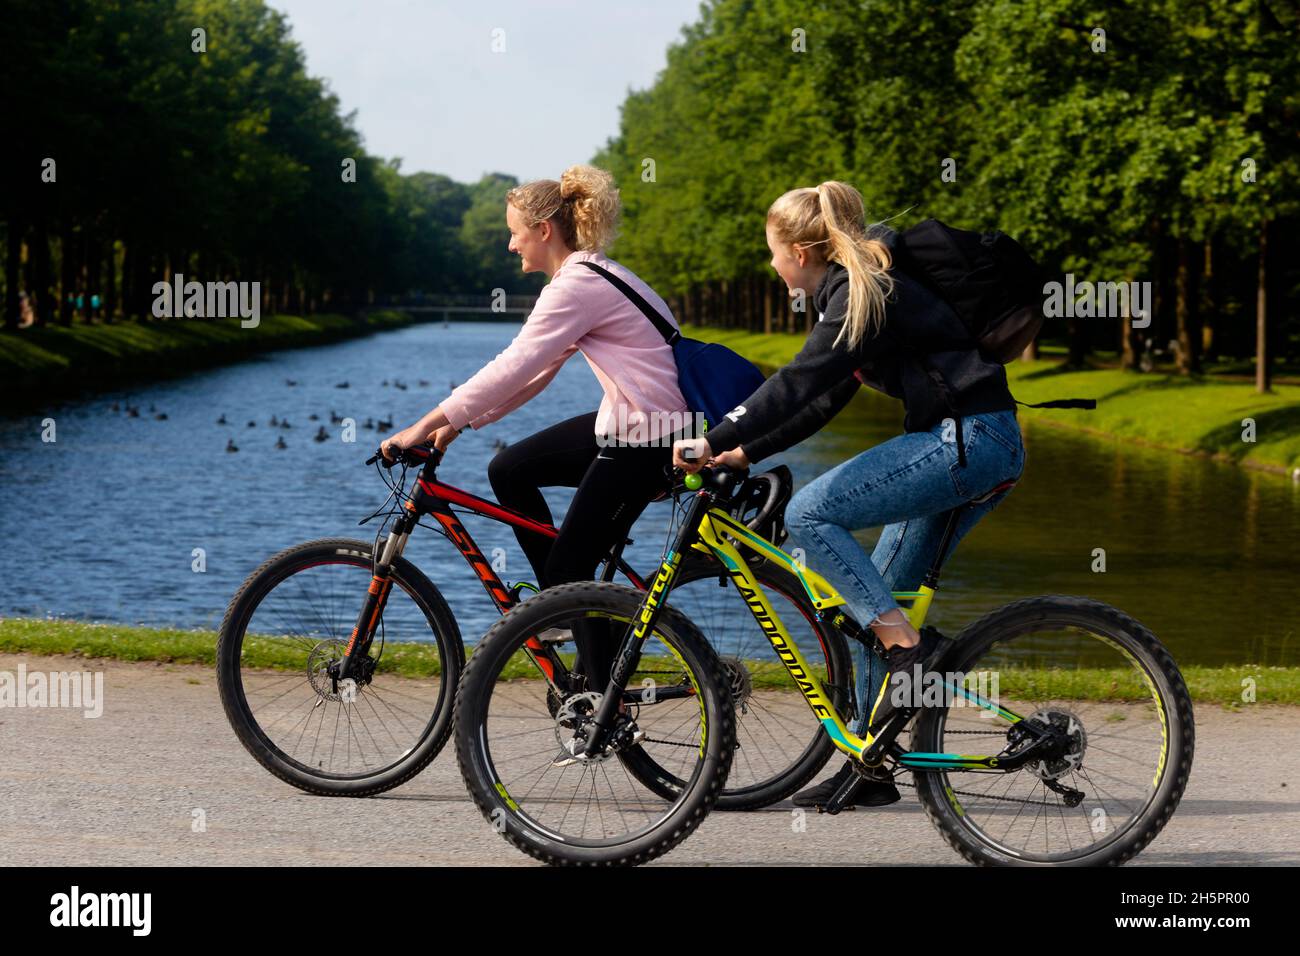 Two women riding bicycles together Healthy lifestyle Germany Europe biking Stock Photo